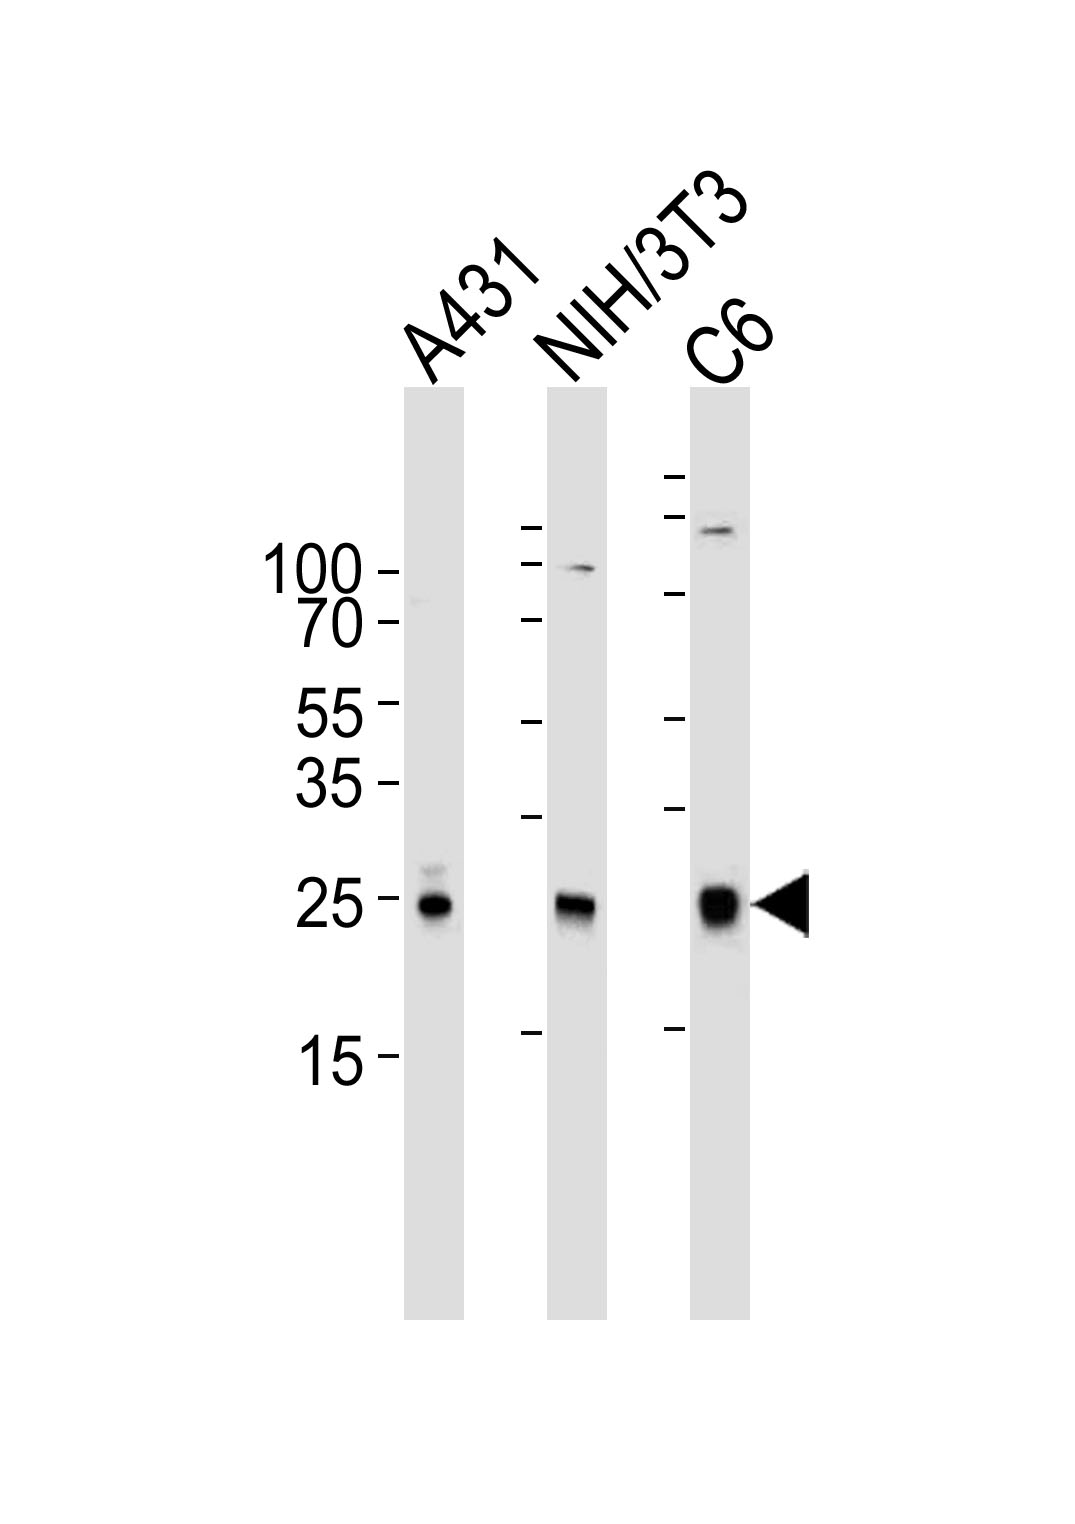 Western blot analysis of lysates from A431, mouse NIH/3T3, rat C6 cell line (from left to right), using RAC1 Antibody(Cat.  #AM8434b).  AM8434b was diluted at 1:1000 at each lane.  A goat anti-mouse IgG H&L(HRP) at 1:3000 dilution was used as the secondary antibody. Lysates at 35?g per lane.